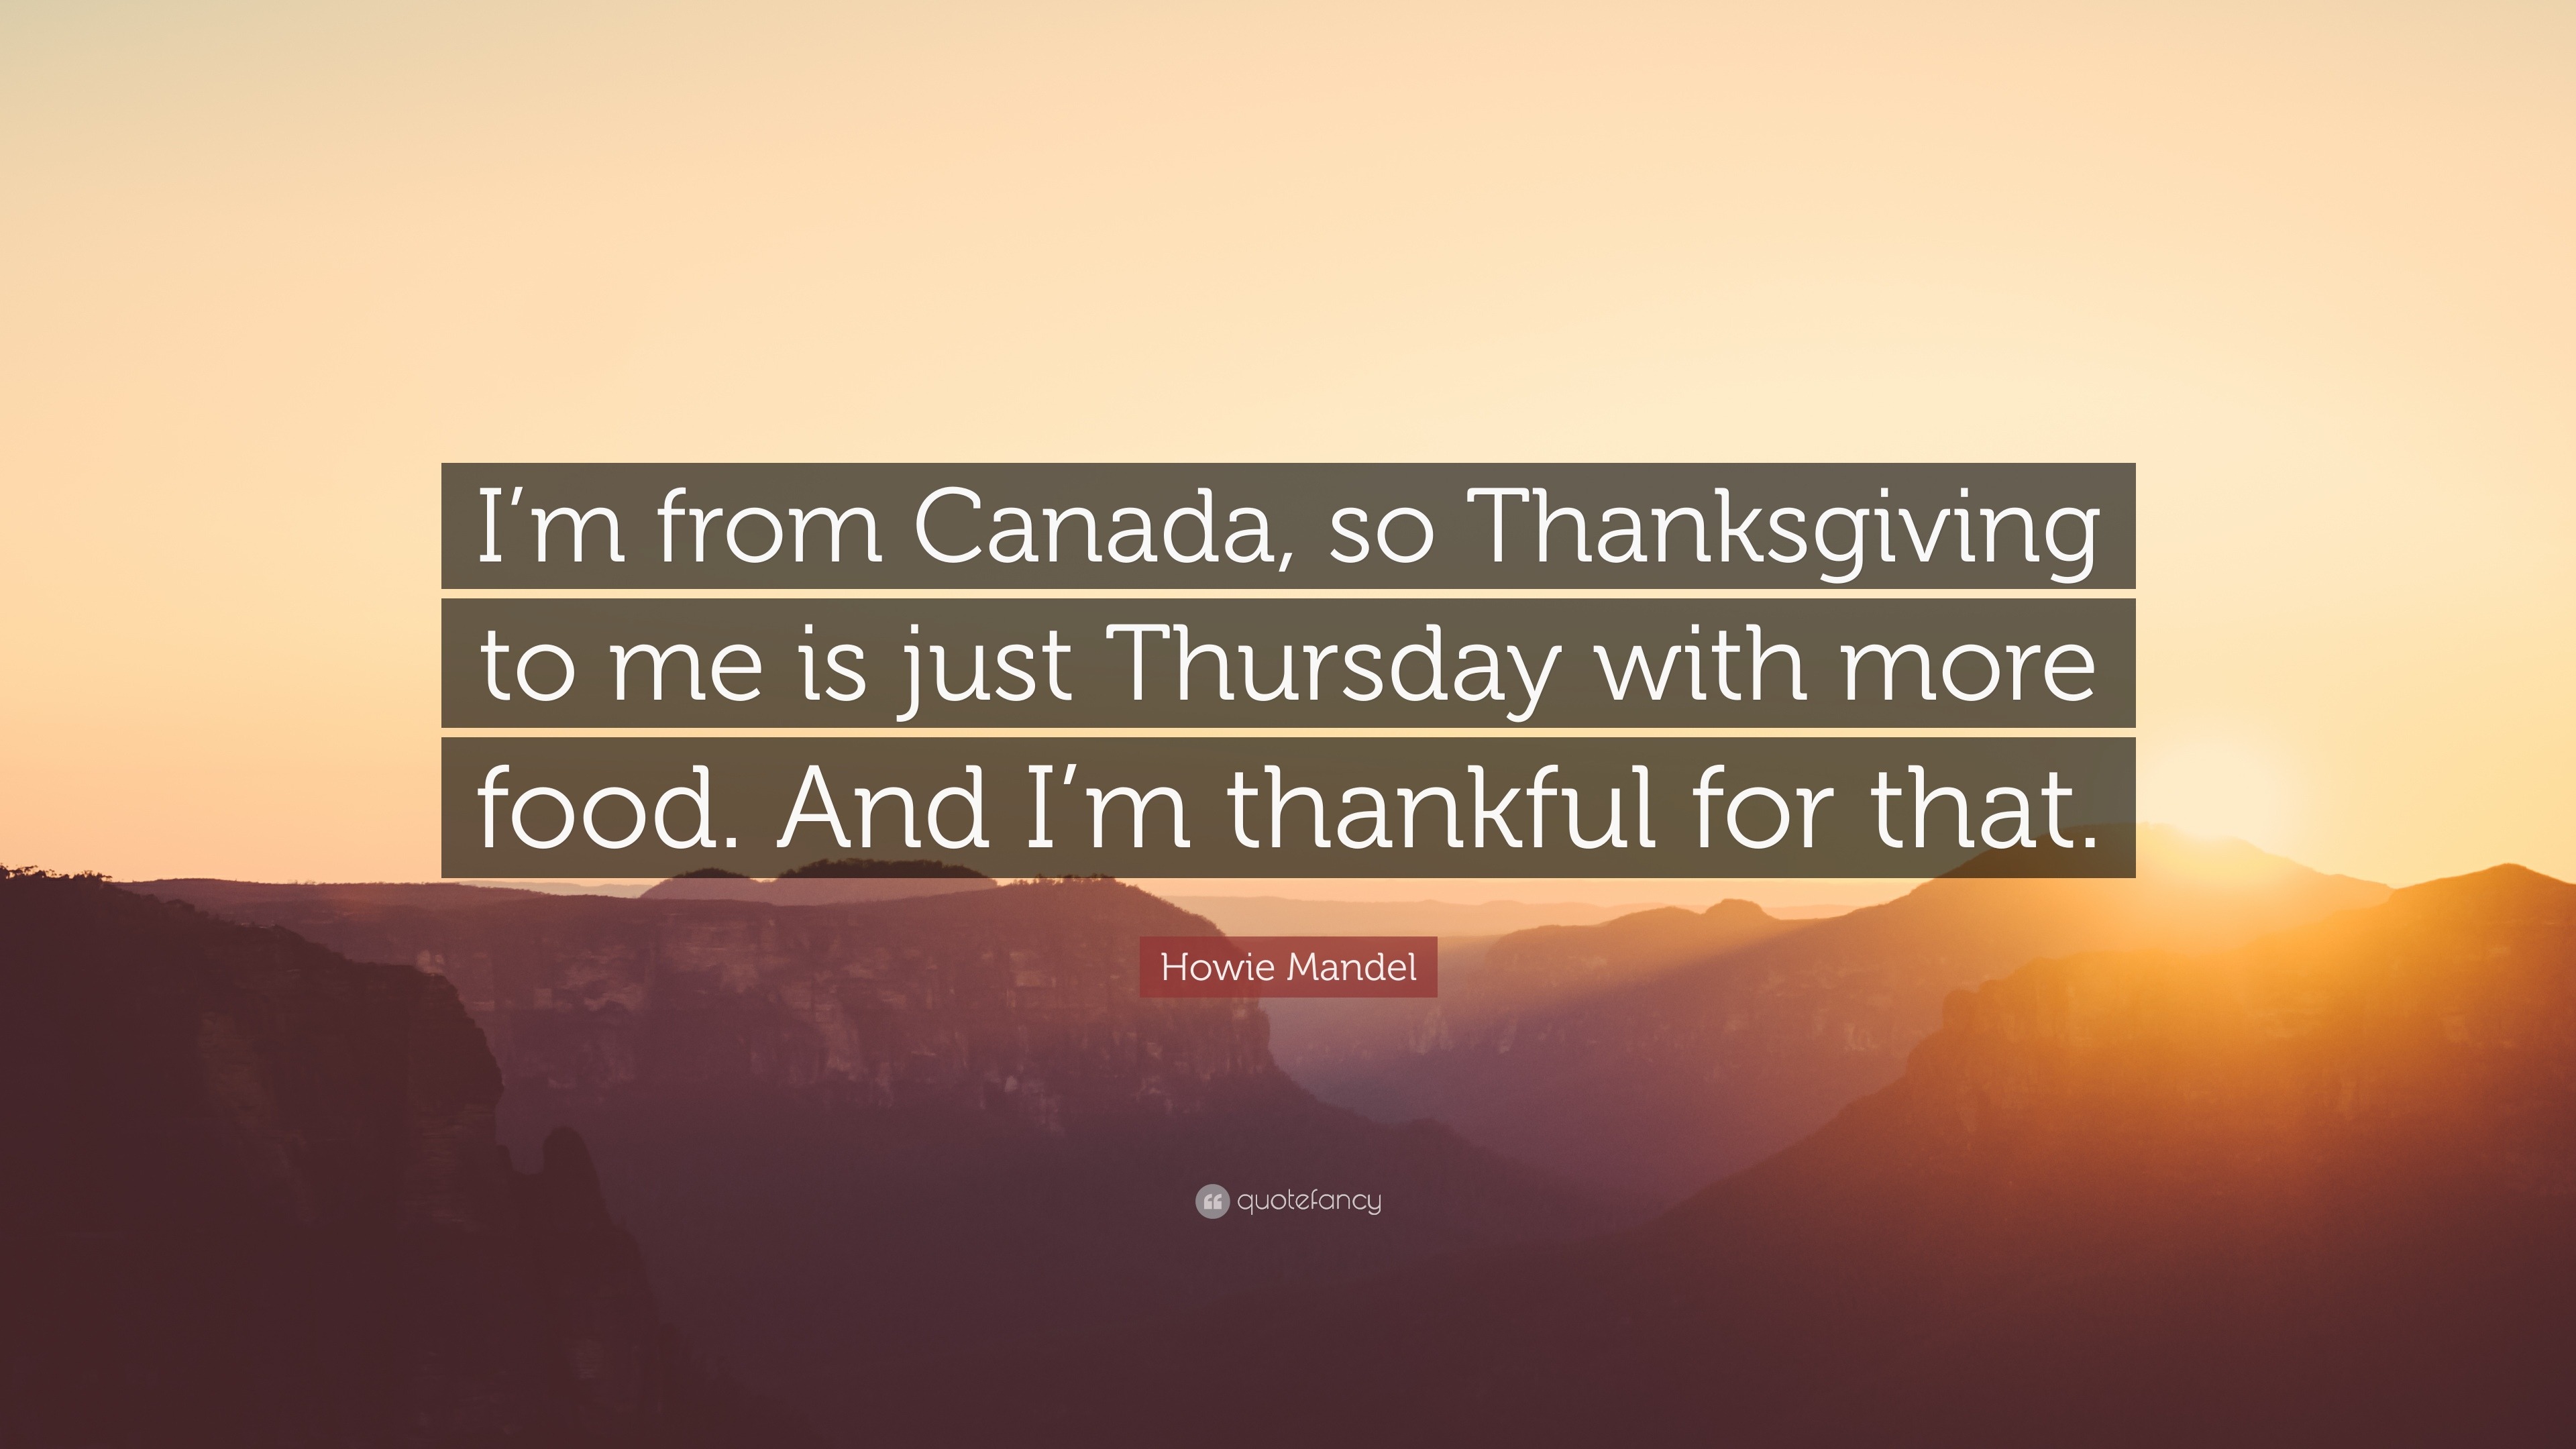 Thanksgiving in Canada in 2024